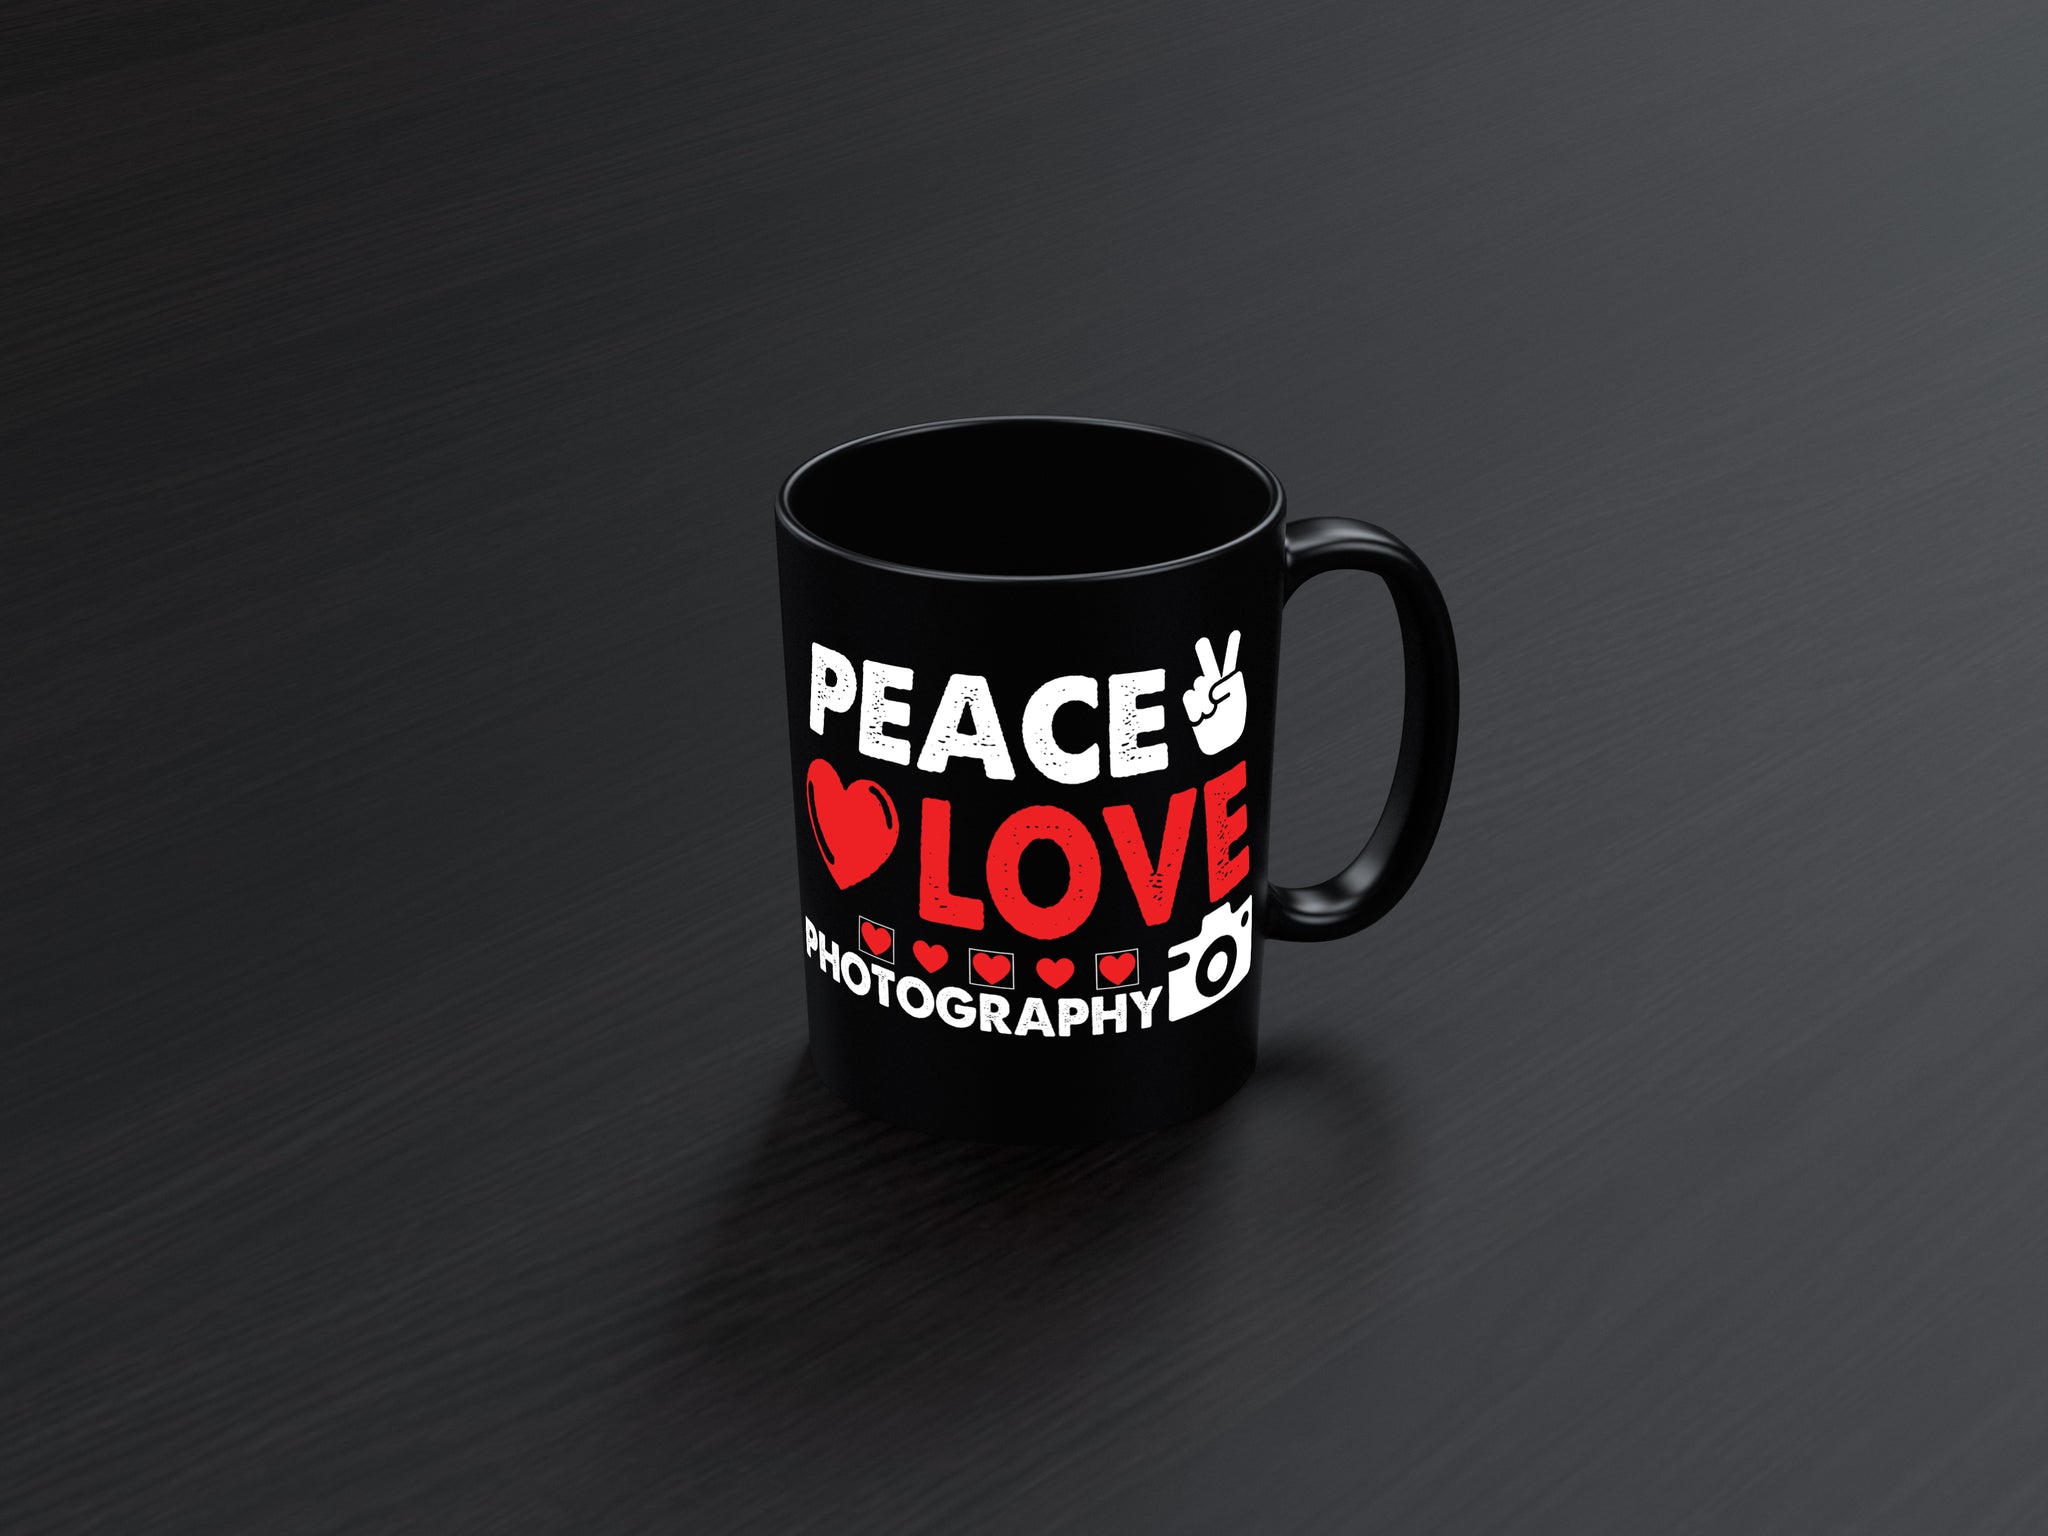 Skitongifts Funny Ceramic Coffee Mug For Birthday, Mother's Day, Father's Day, Christmas Peace And Love And Photography